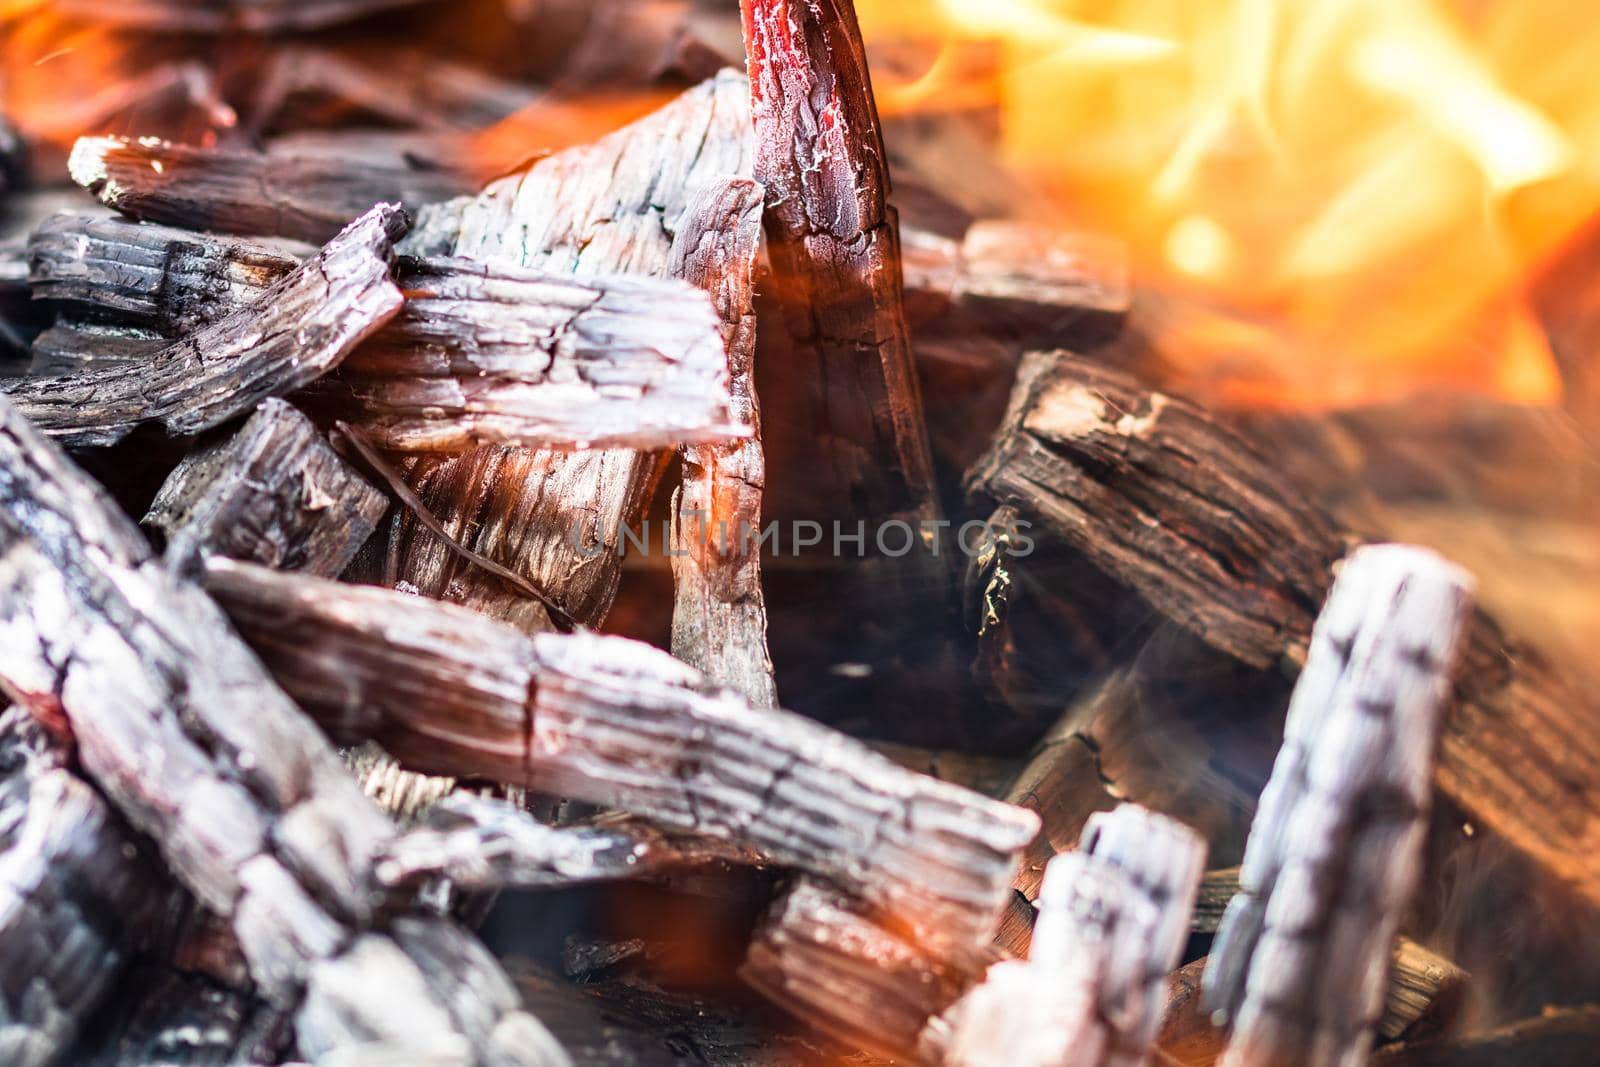 Burning wood chips forming coal. Barbecue preparation, fire before cooking. Hot coal made of greatly heated wood.